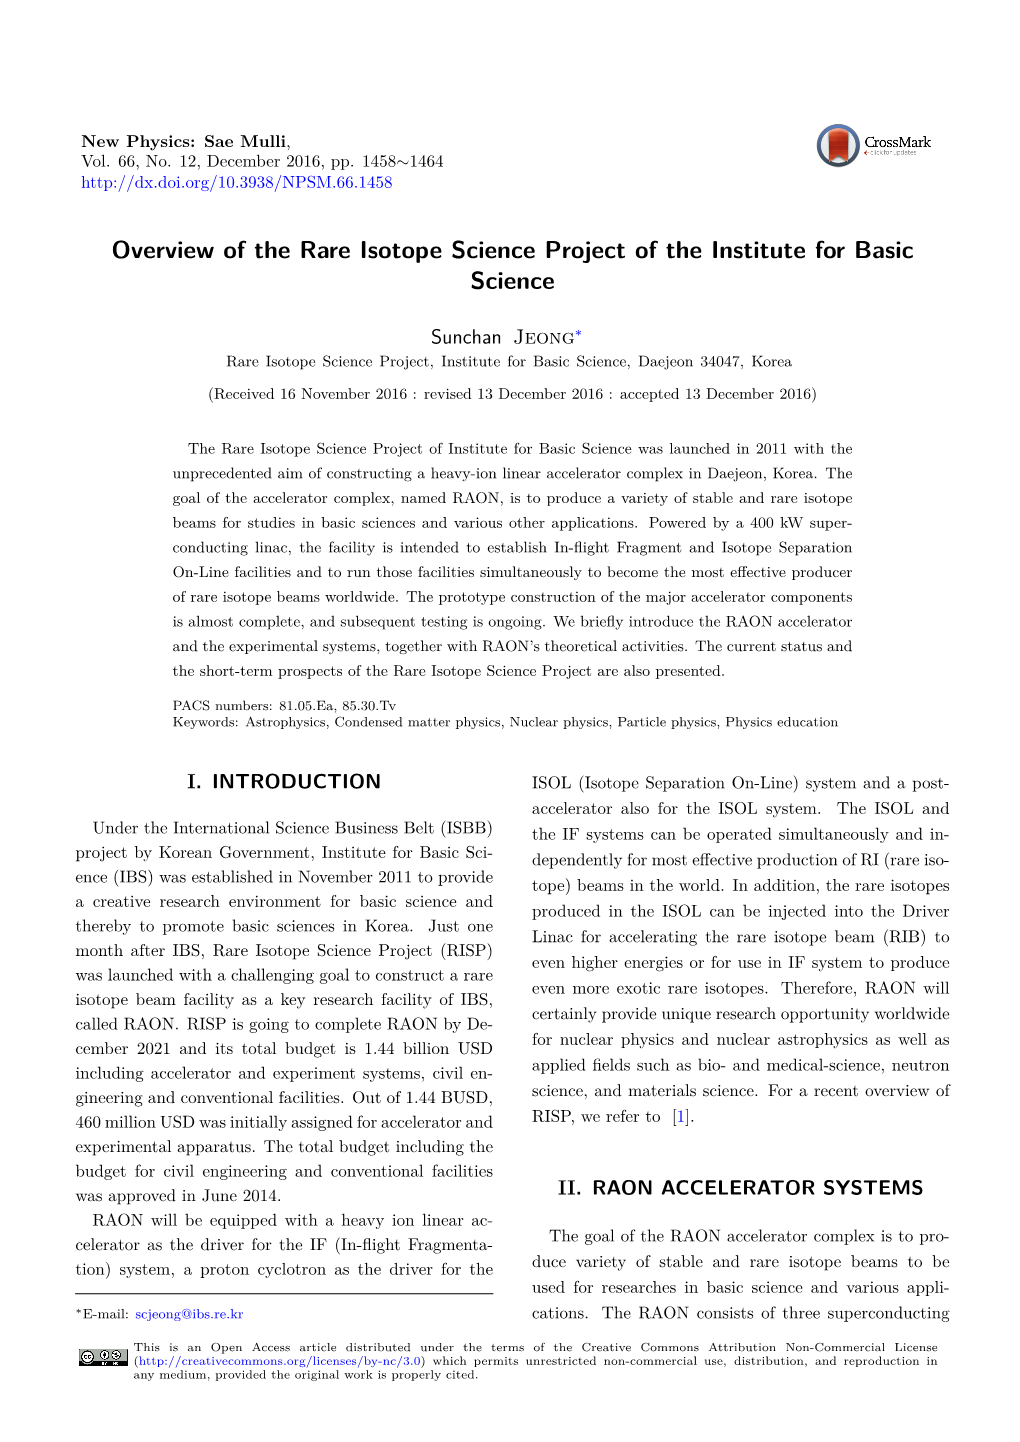 Overview of the Rare Isotope Science Project of the Institute for Basic Science